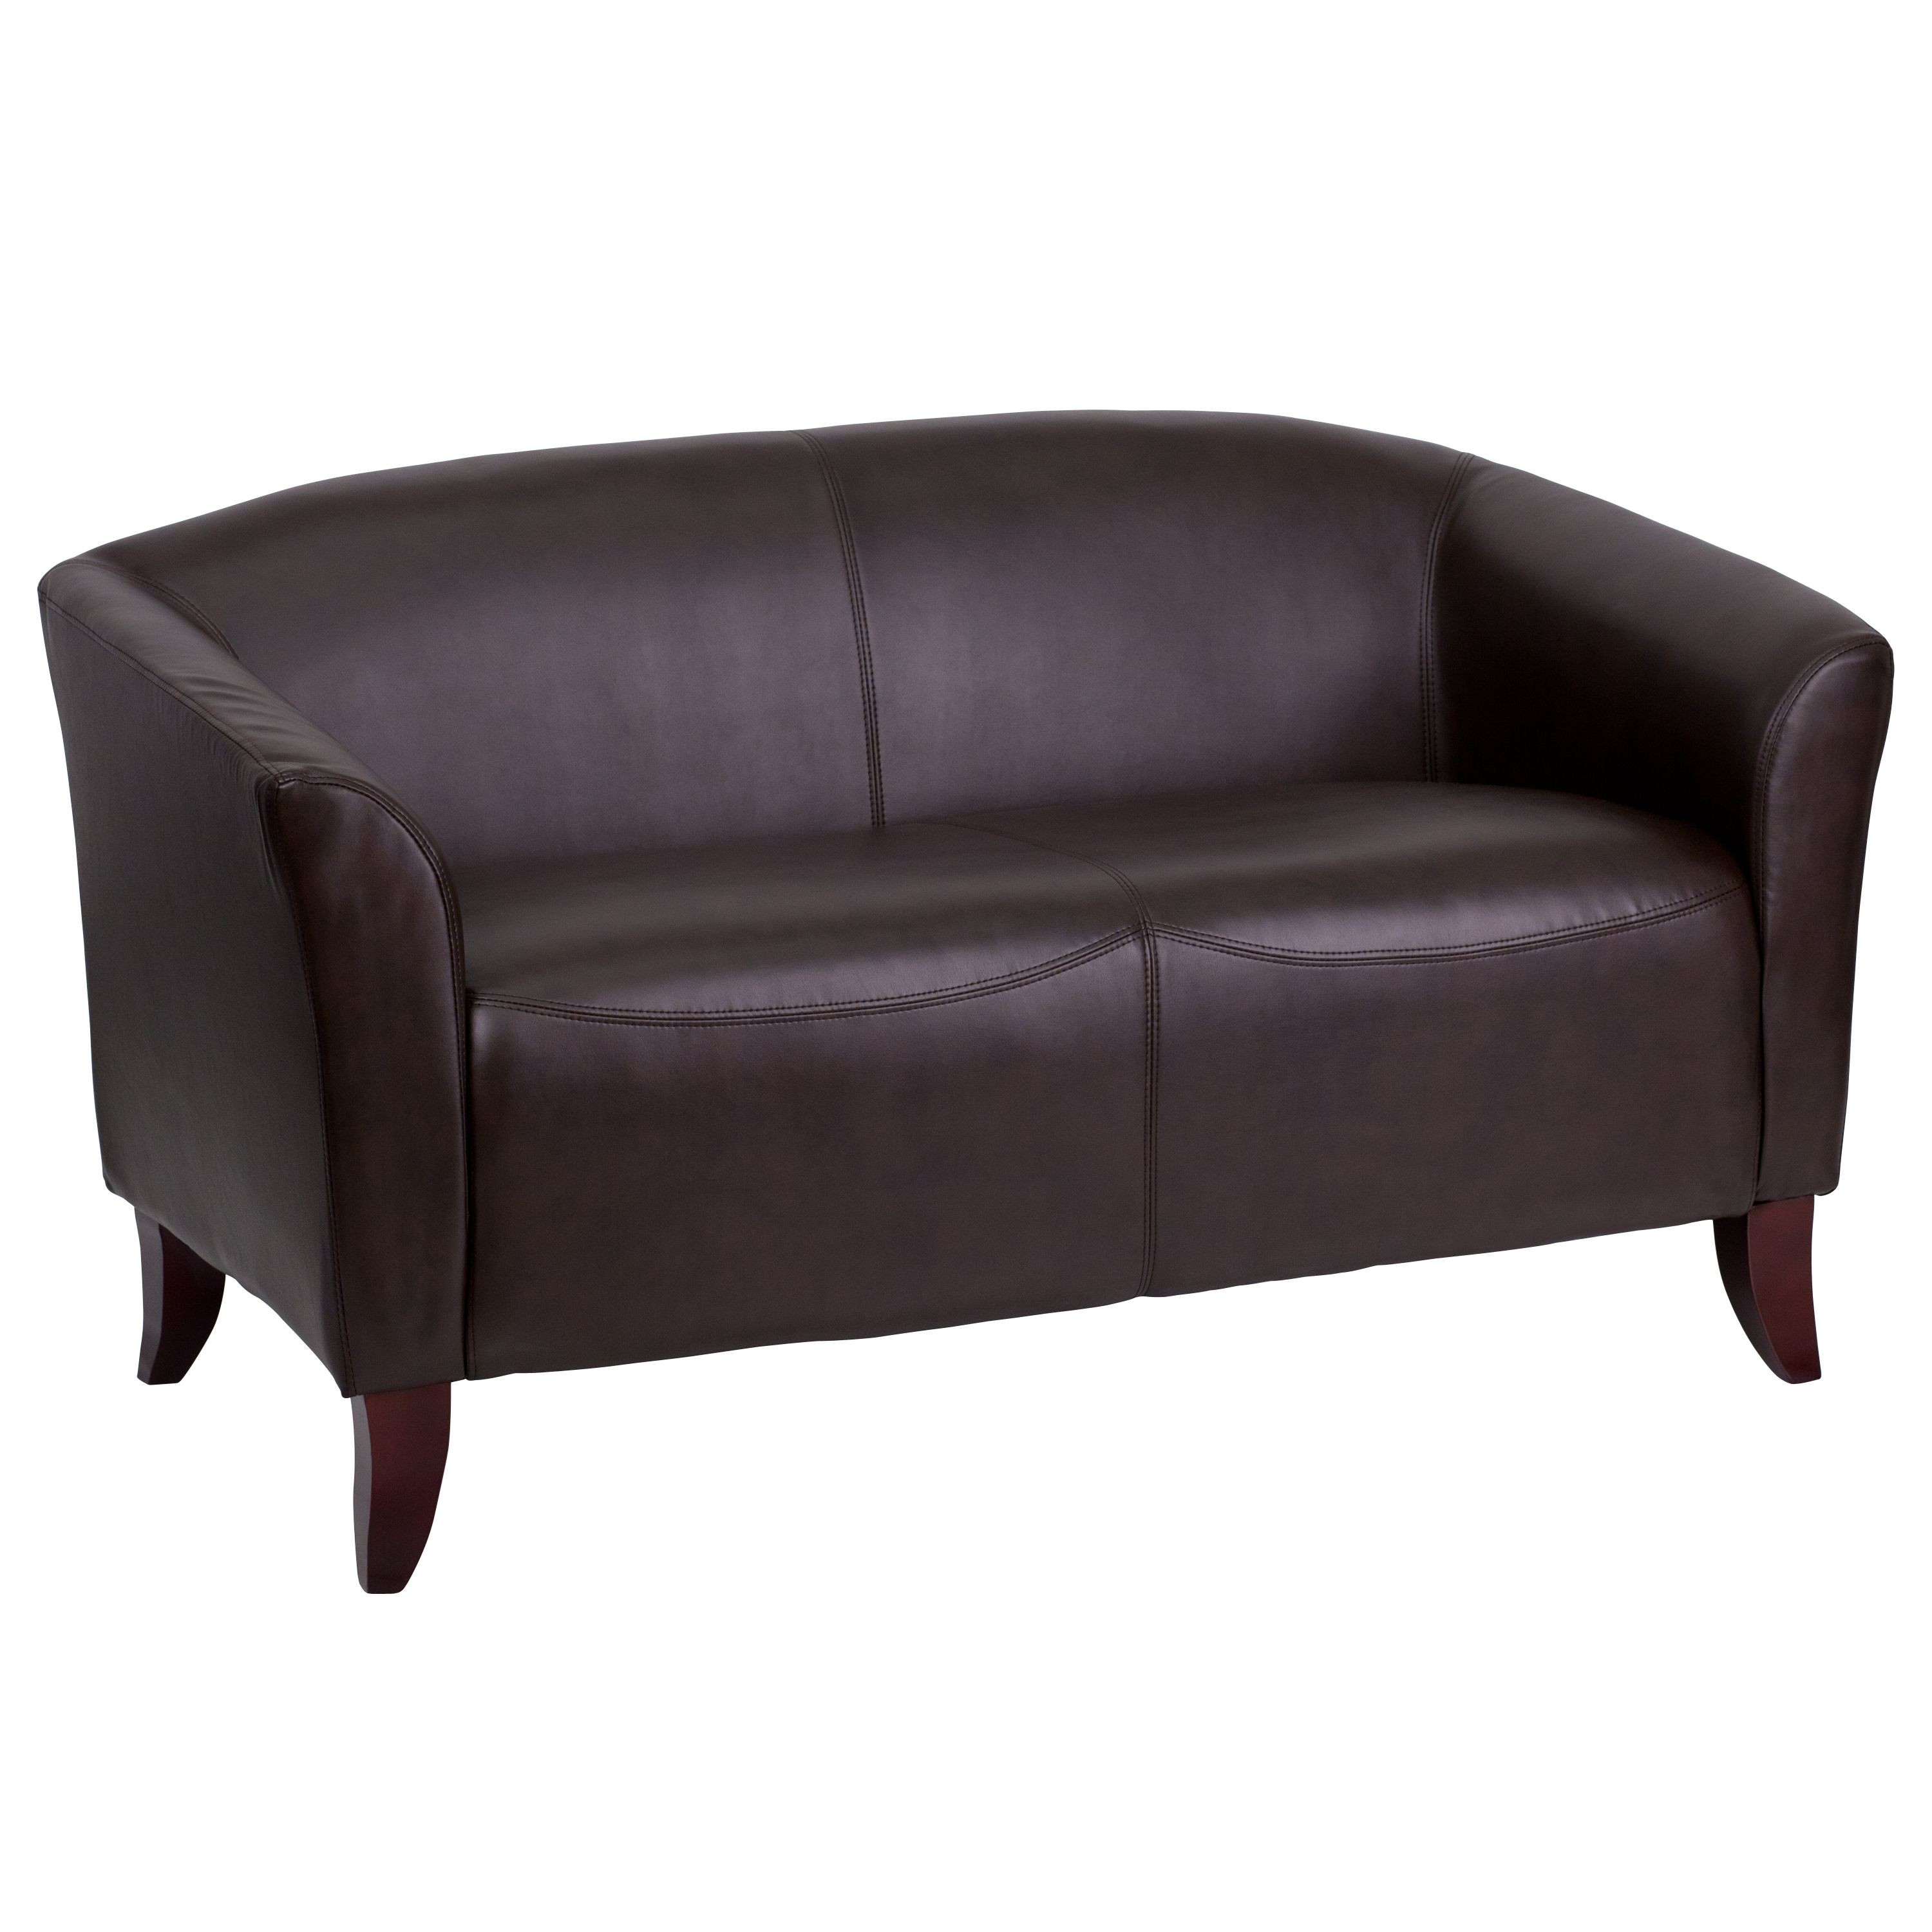 Flash Furniture 111-2-BN-GG HERCULES Imperial Series Brown Leather Love Seat